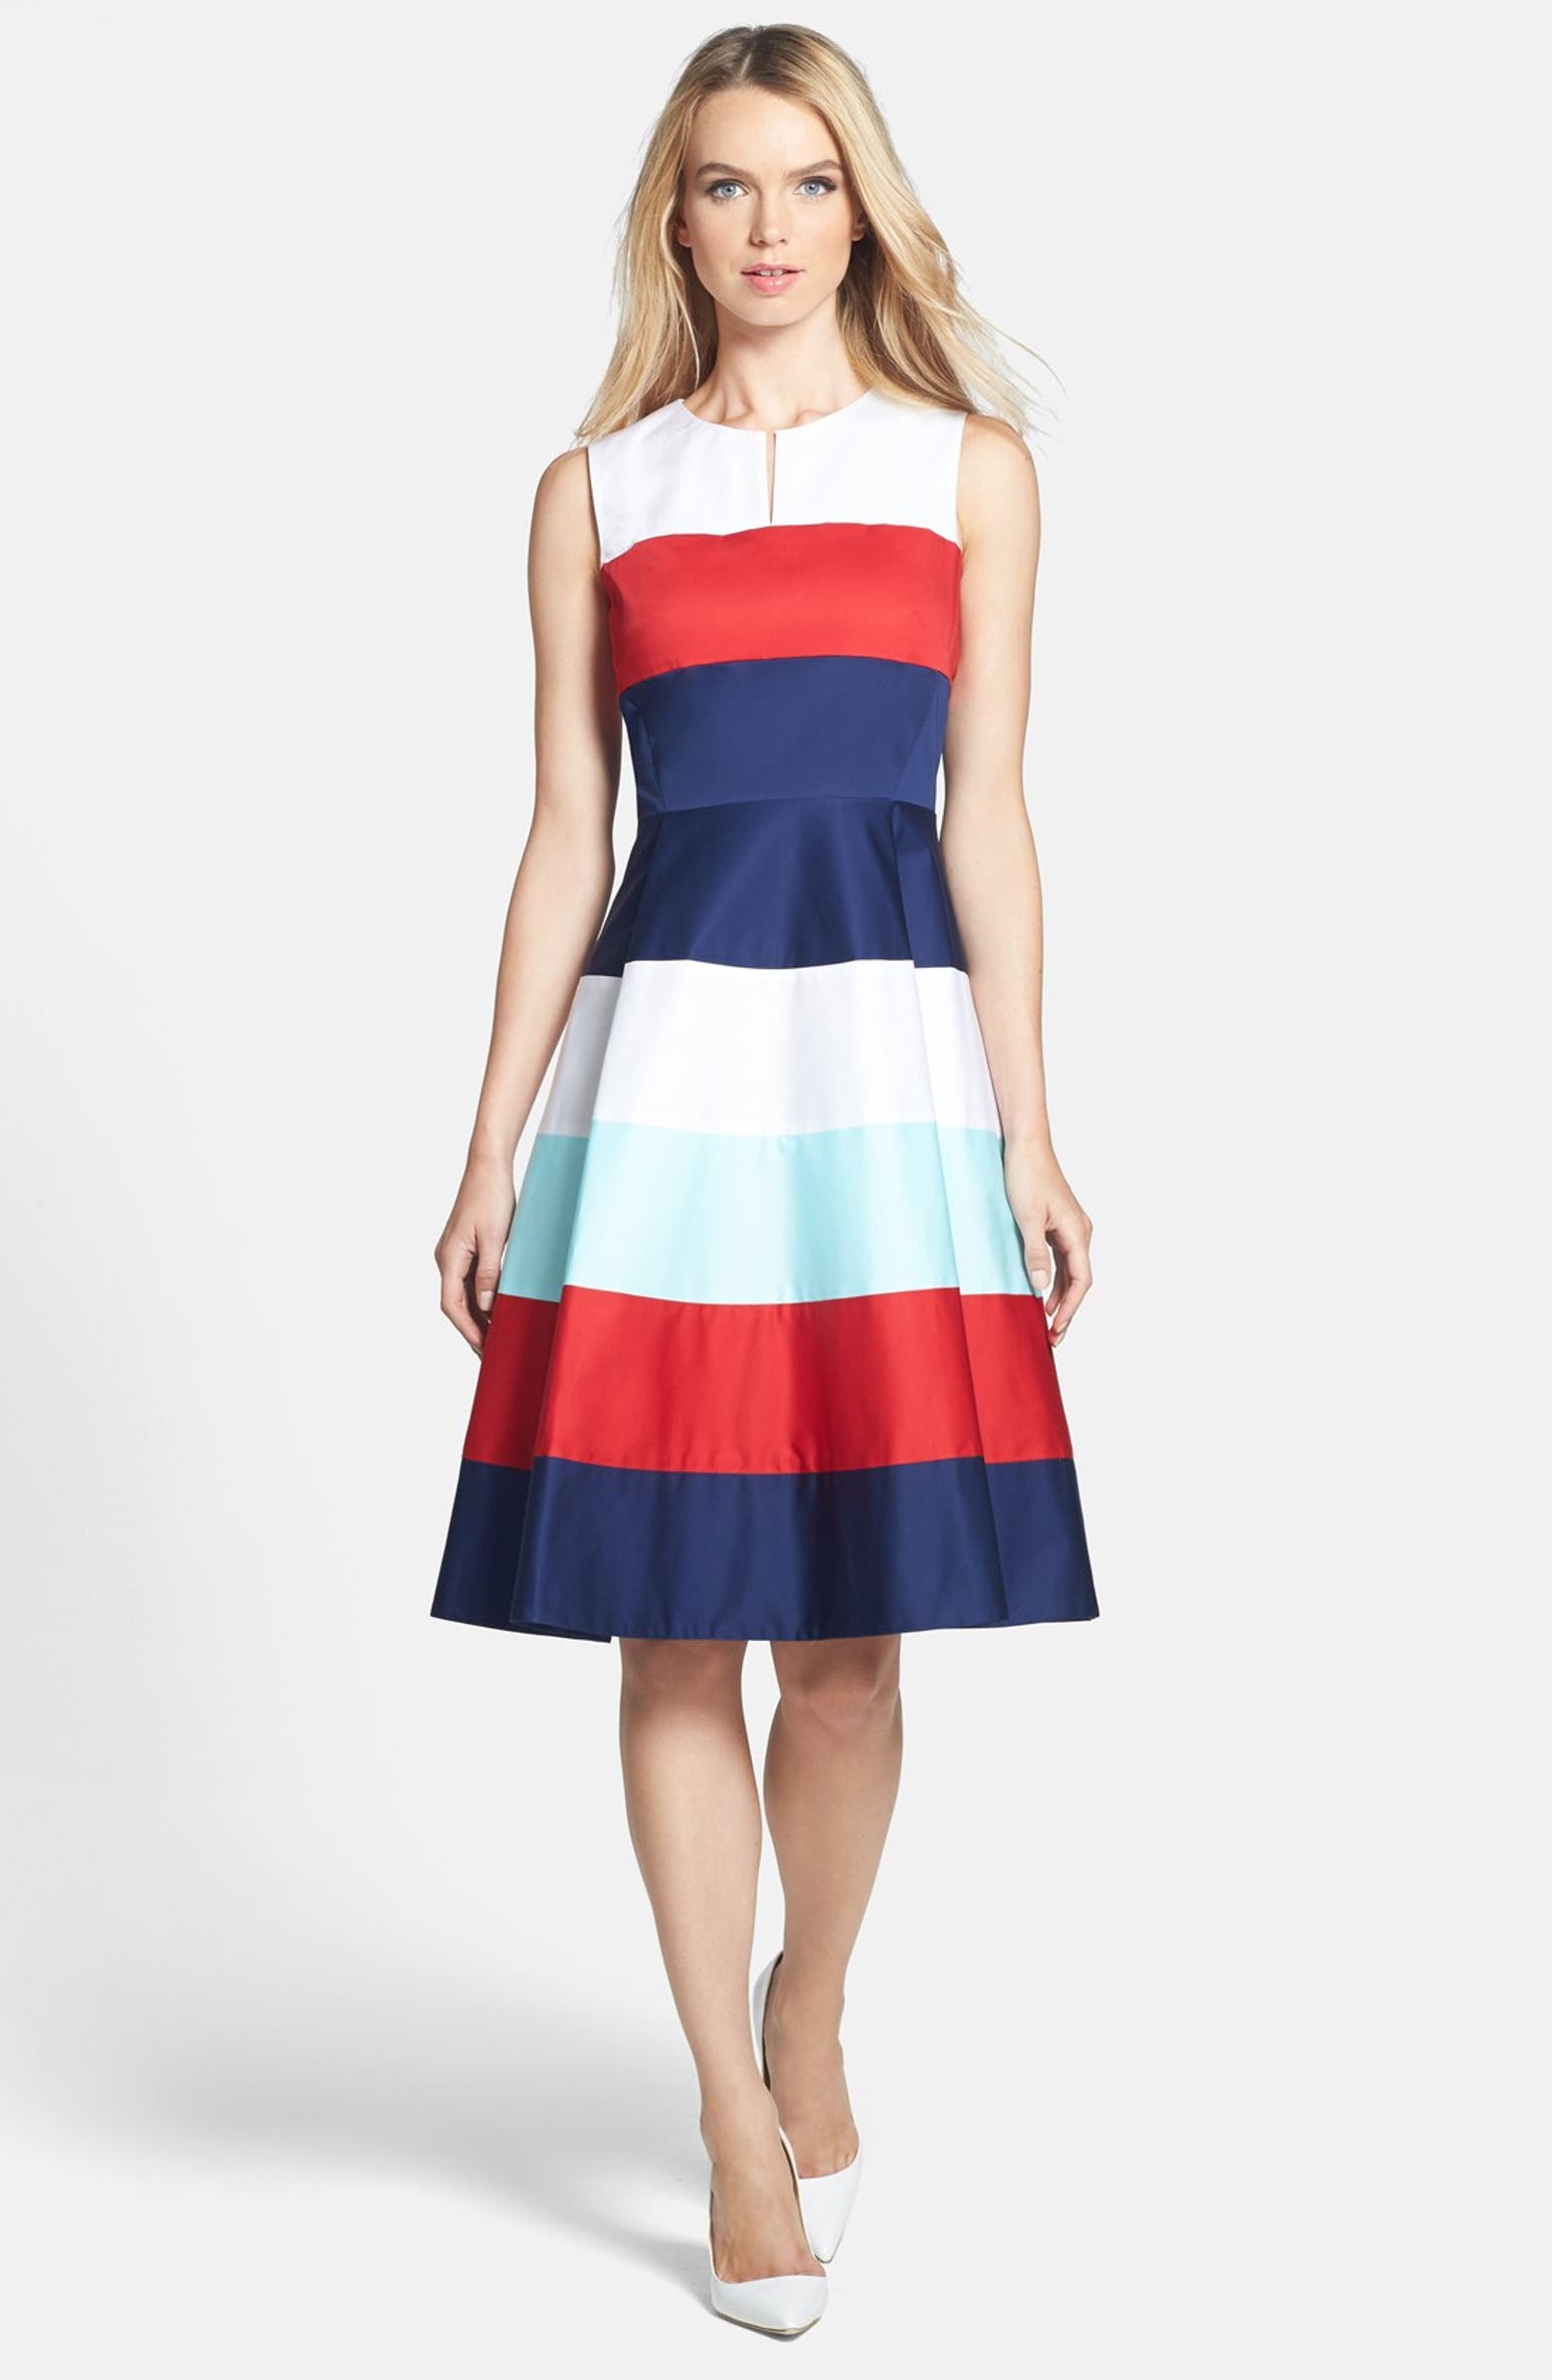 kate spade new york 'corley' stretch cotton fit & flare dress | Nordstrom